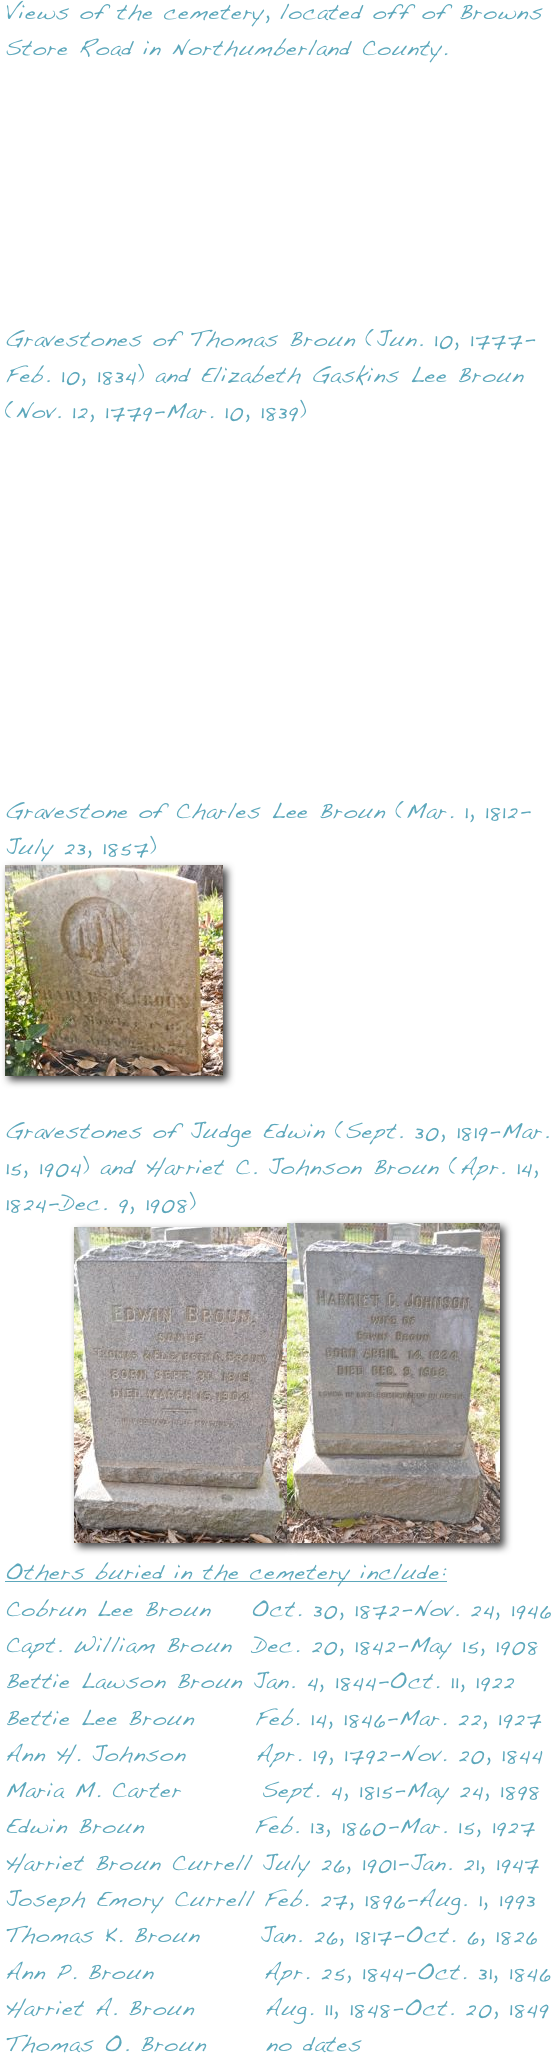 Views of the cemetery, located off of Browns Store Road in Northumberland County.







Gravestones of Thomas Broun (Jun. 10, 1777-Feb. 10, 1834) and Elizabeth Gaskins Lee Broun (Nov. 12, 1779-Mar. 10, 1839)










Gravestone of Charles Lee Broun (Mar. 1, 1812-July 23, 1857)
￼
    
Gravestones of Judge Edwin (Sept. 30, 1819-Mar. 15, 1904) and Harriet C. Johnson Broun (Apr. 14, 1824-Dec. 9, 1908)
       ￼￼
Others buried in the cemetery include:
Cobrun Lee Broun    Oct. 30, 1872-Nov. 24, 1946    
Capt. William Broun  Dec. 20, 1842-May 15, 1908
Bettie Lawson Broun Jan. 4, 1844-Oct. 11, 1922    
Bettie Lee Broun      Feb. 14, 1846-Mar. 22, 1927
Ann H. Johnson       Apr. 19, 1792-Nov. 20, 1844
Maria M. Carter        Sept. 4, 1815-May 24, 1898
Edwin Broun           Feb. 13, 1860-Mar. 15, 1927
Harriet Broun Currell July 26, 1901-Jan. 21, 1947
Joseph Emory Currell Feb. 27, 1896-Aug. 1, 1993
Thomas K. Broun      Jan. 26, 1817-Oct. 6, 1826
Ann P. Broun           Apr. 25, 1844-Oct. 31, 1846
Harriet A. Broun       Aug. 11, 1848-Oct. 20, 1849
Thomas O. Broun      no dates

